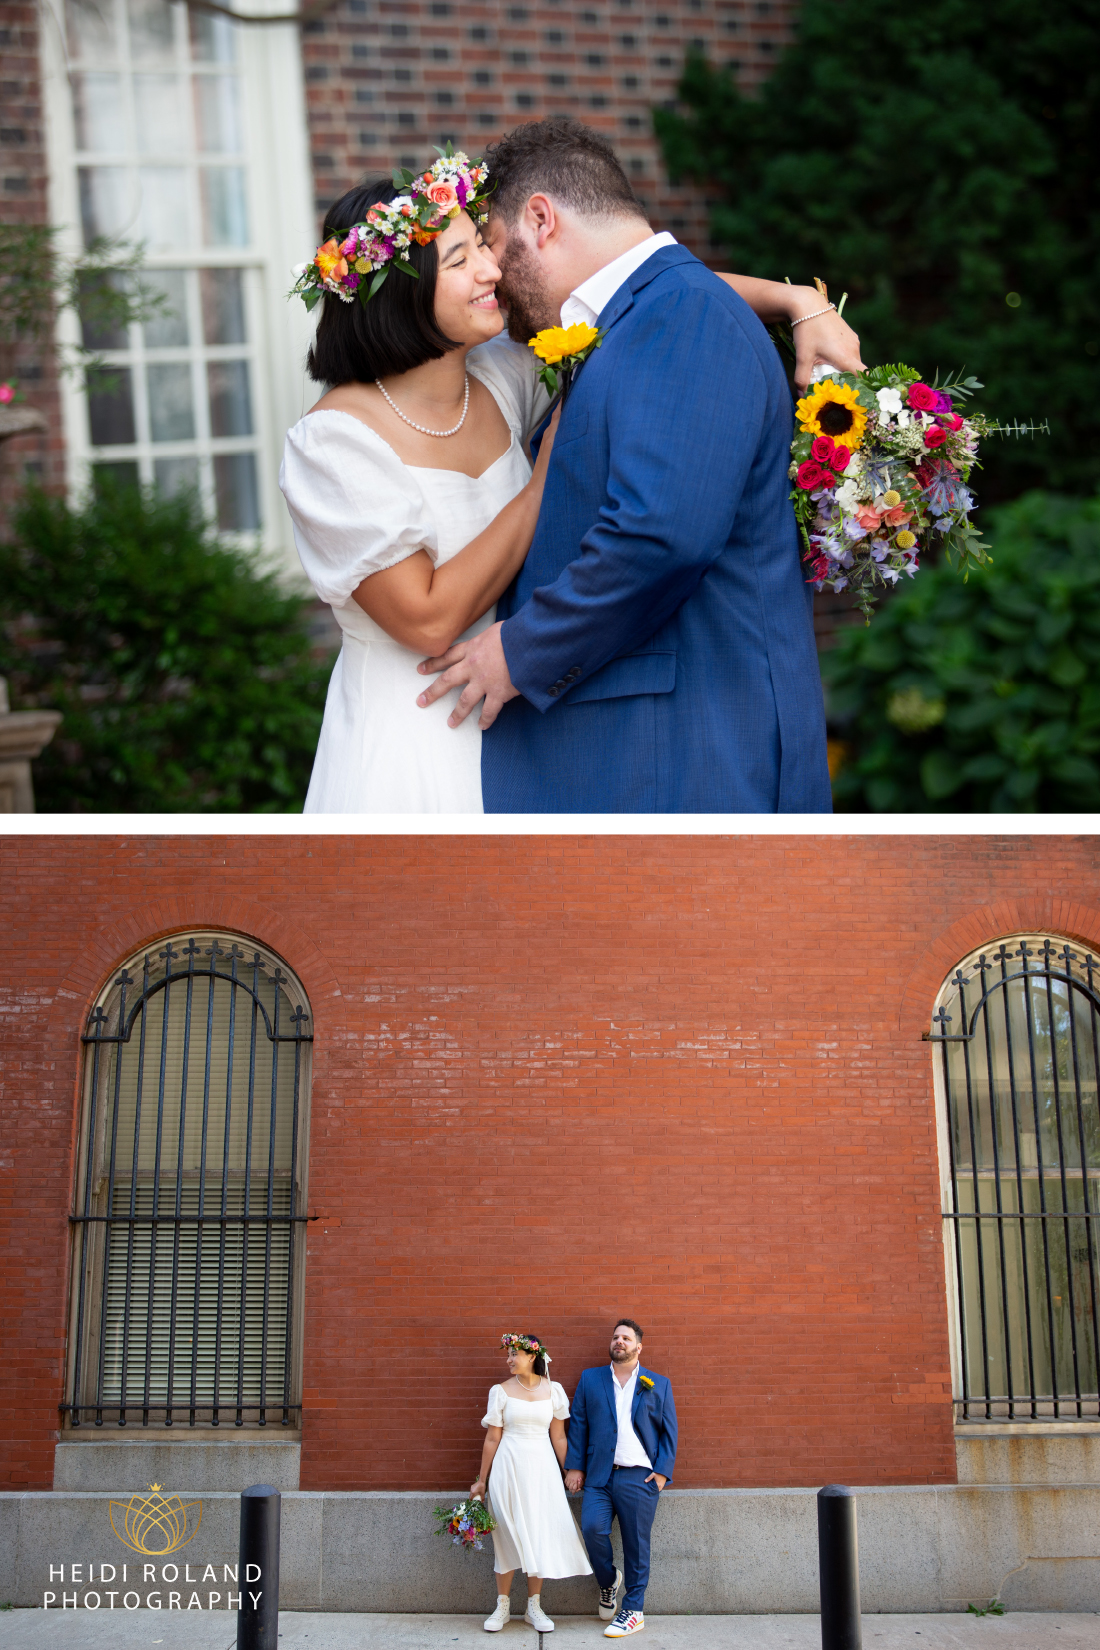 Old city Philadelphia bride and groom couples photos against brick wall